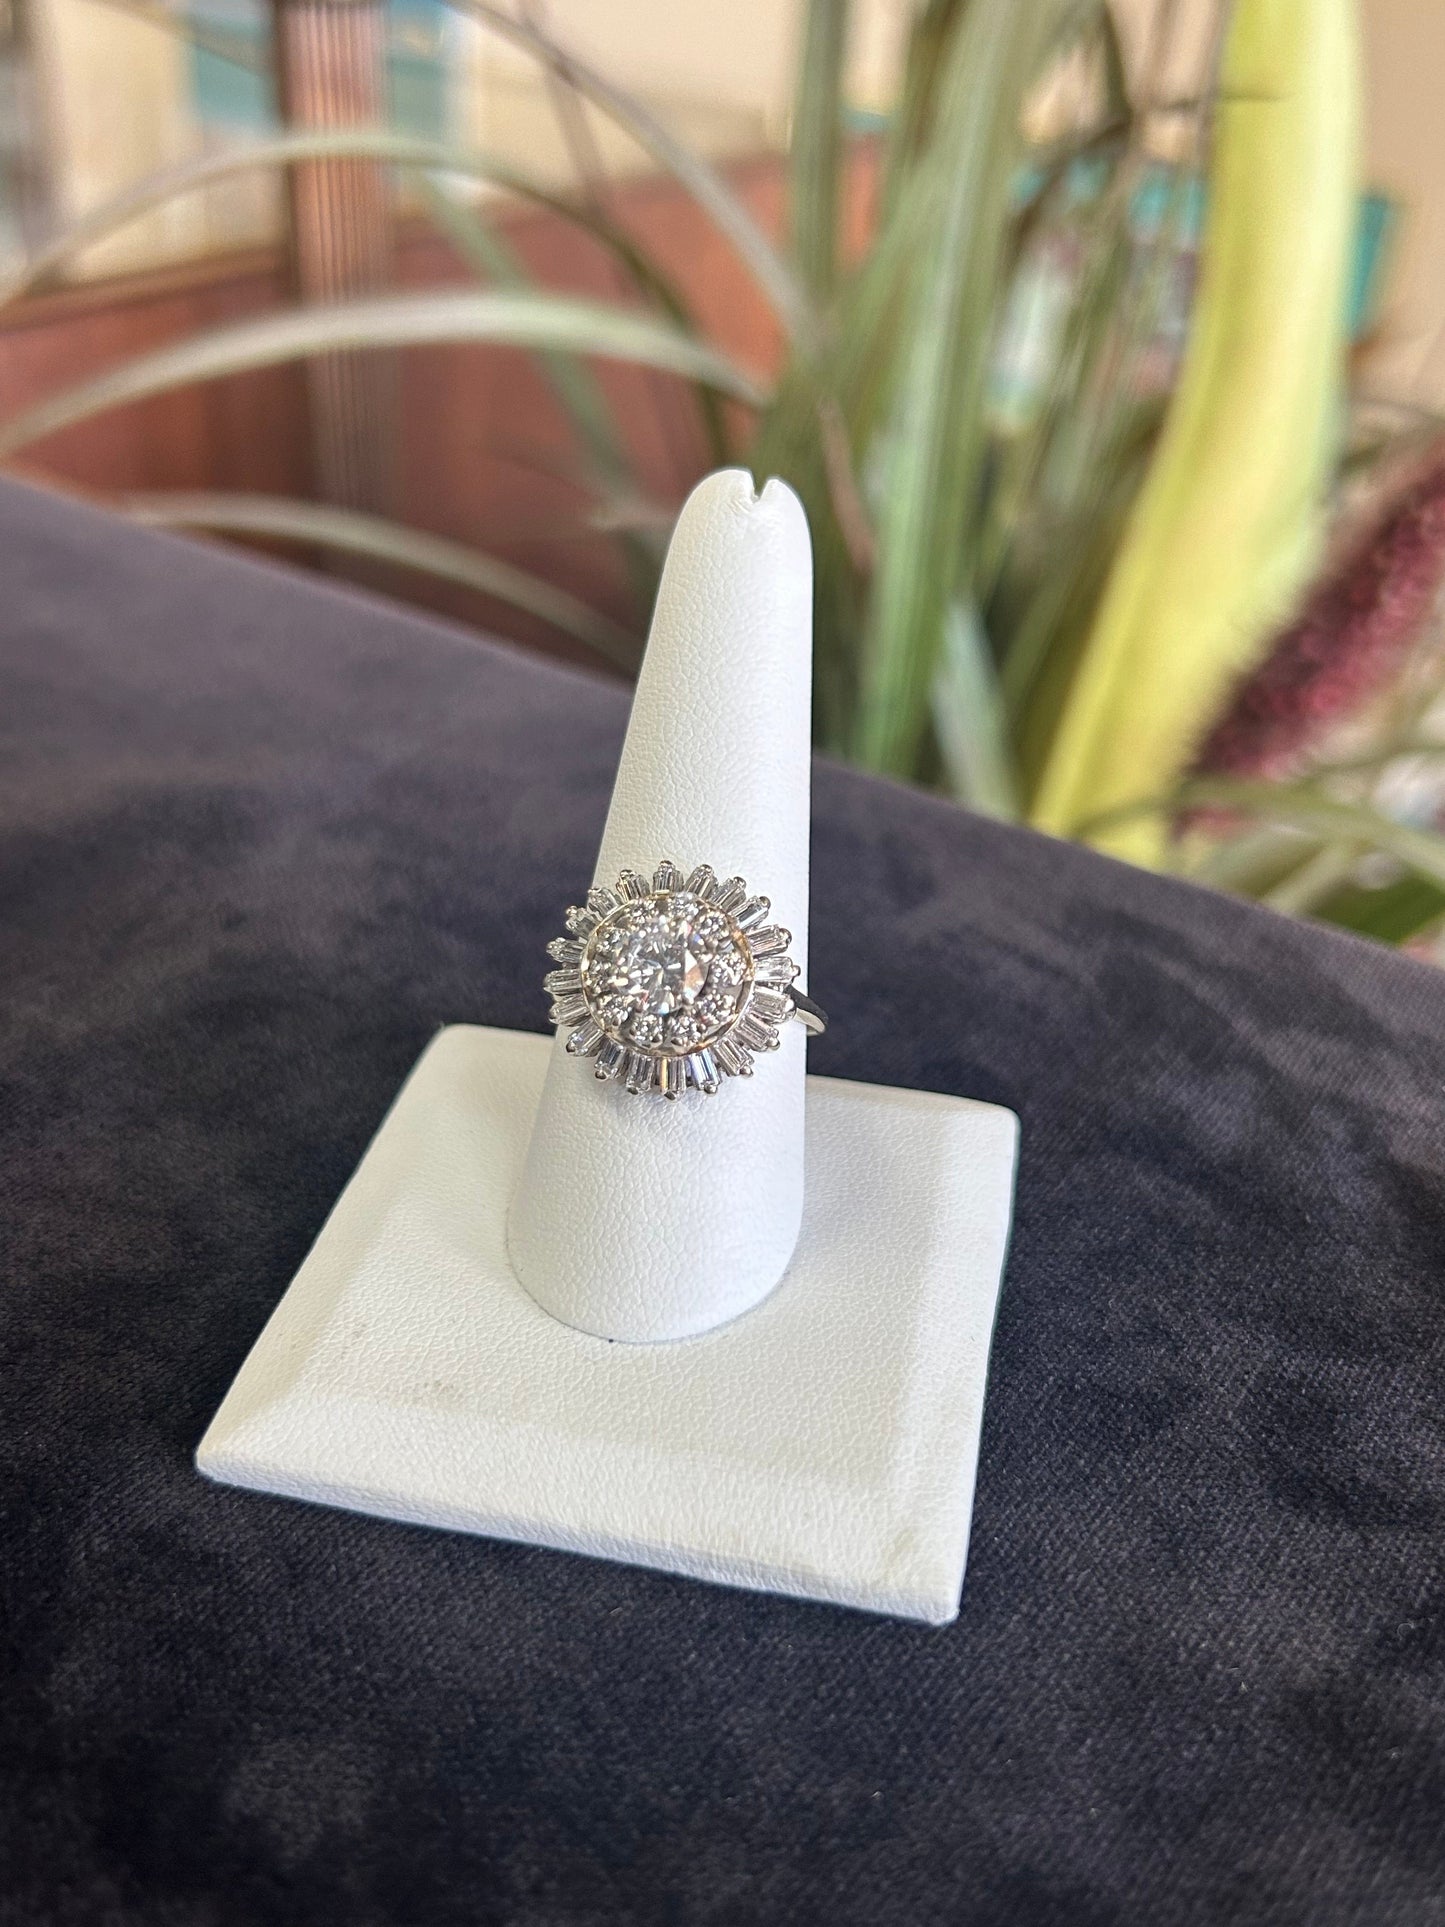 a close up of a ring on a napkin holder